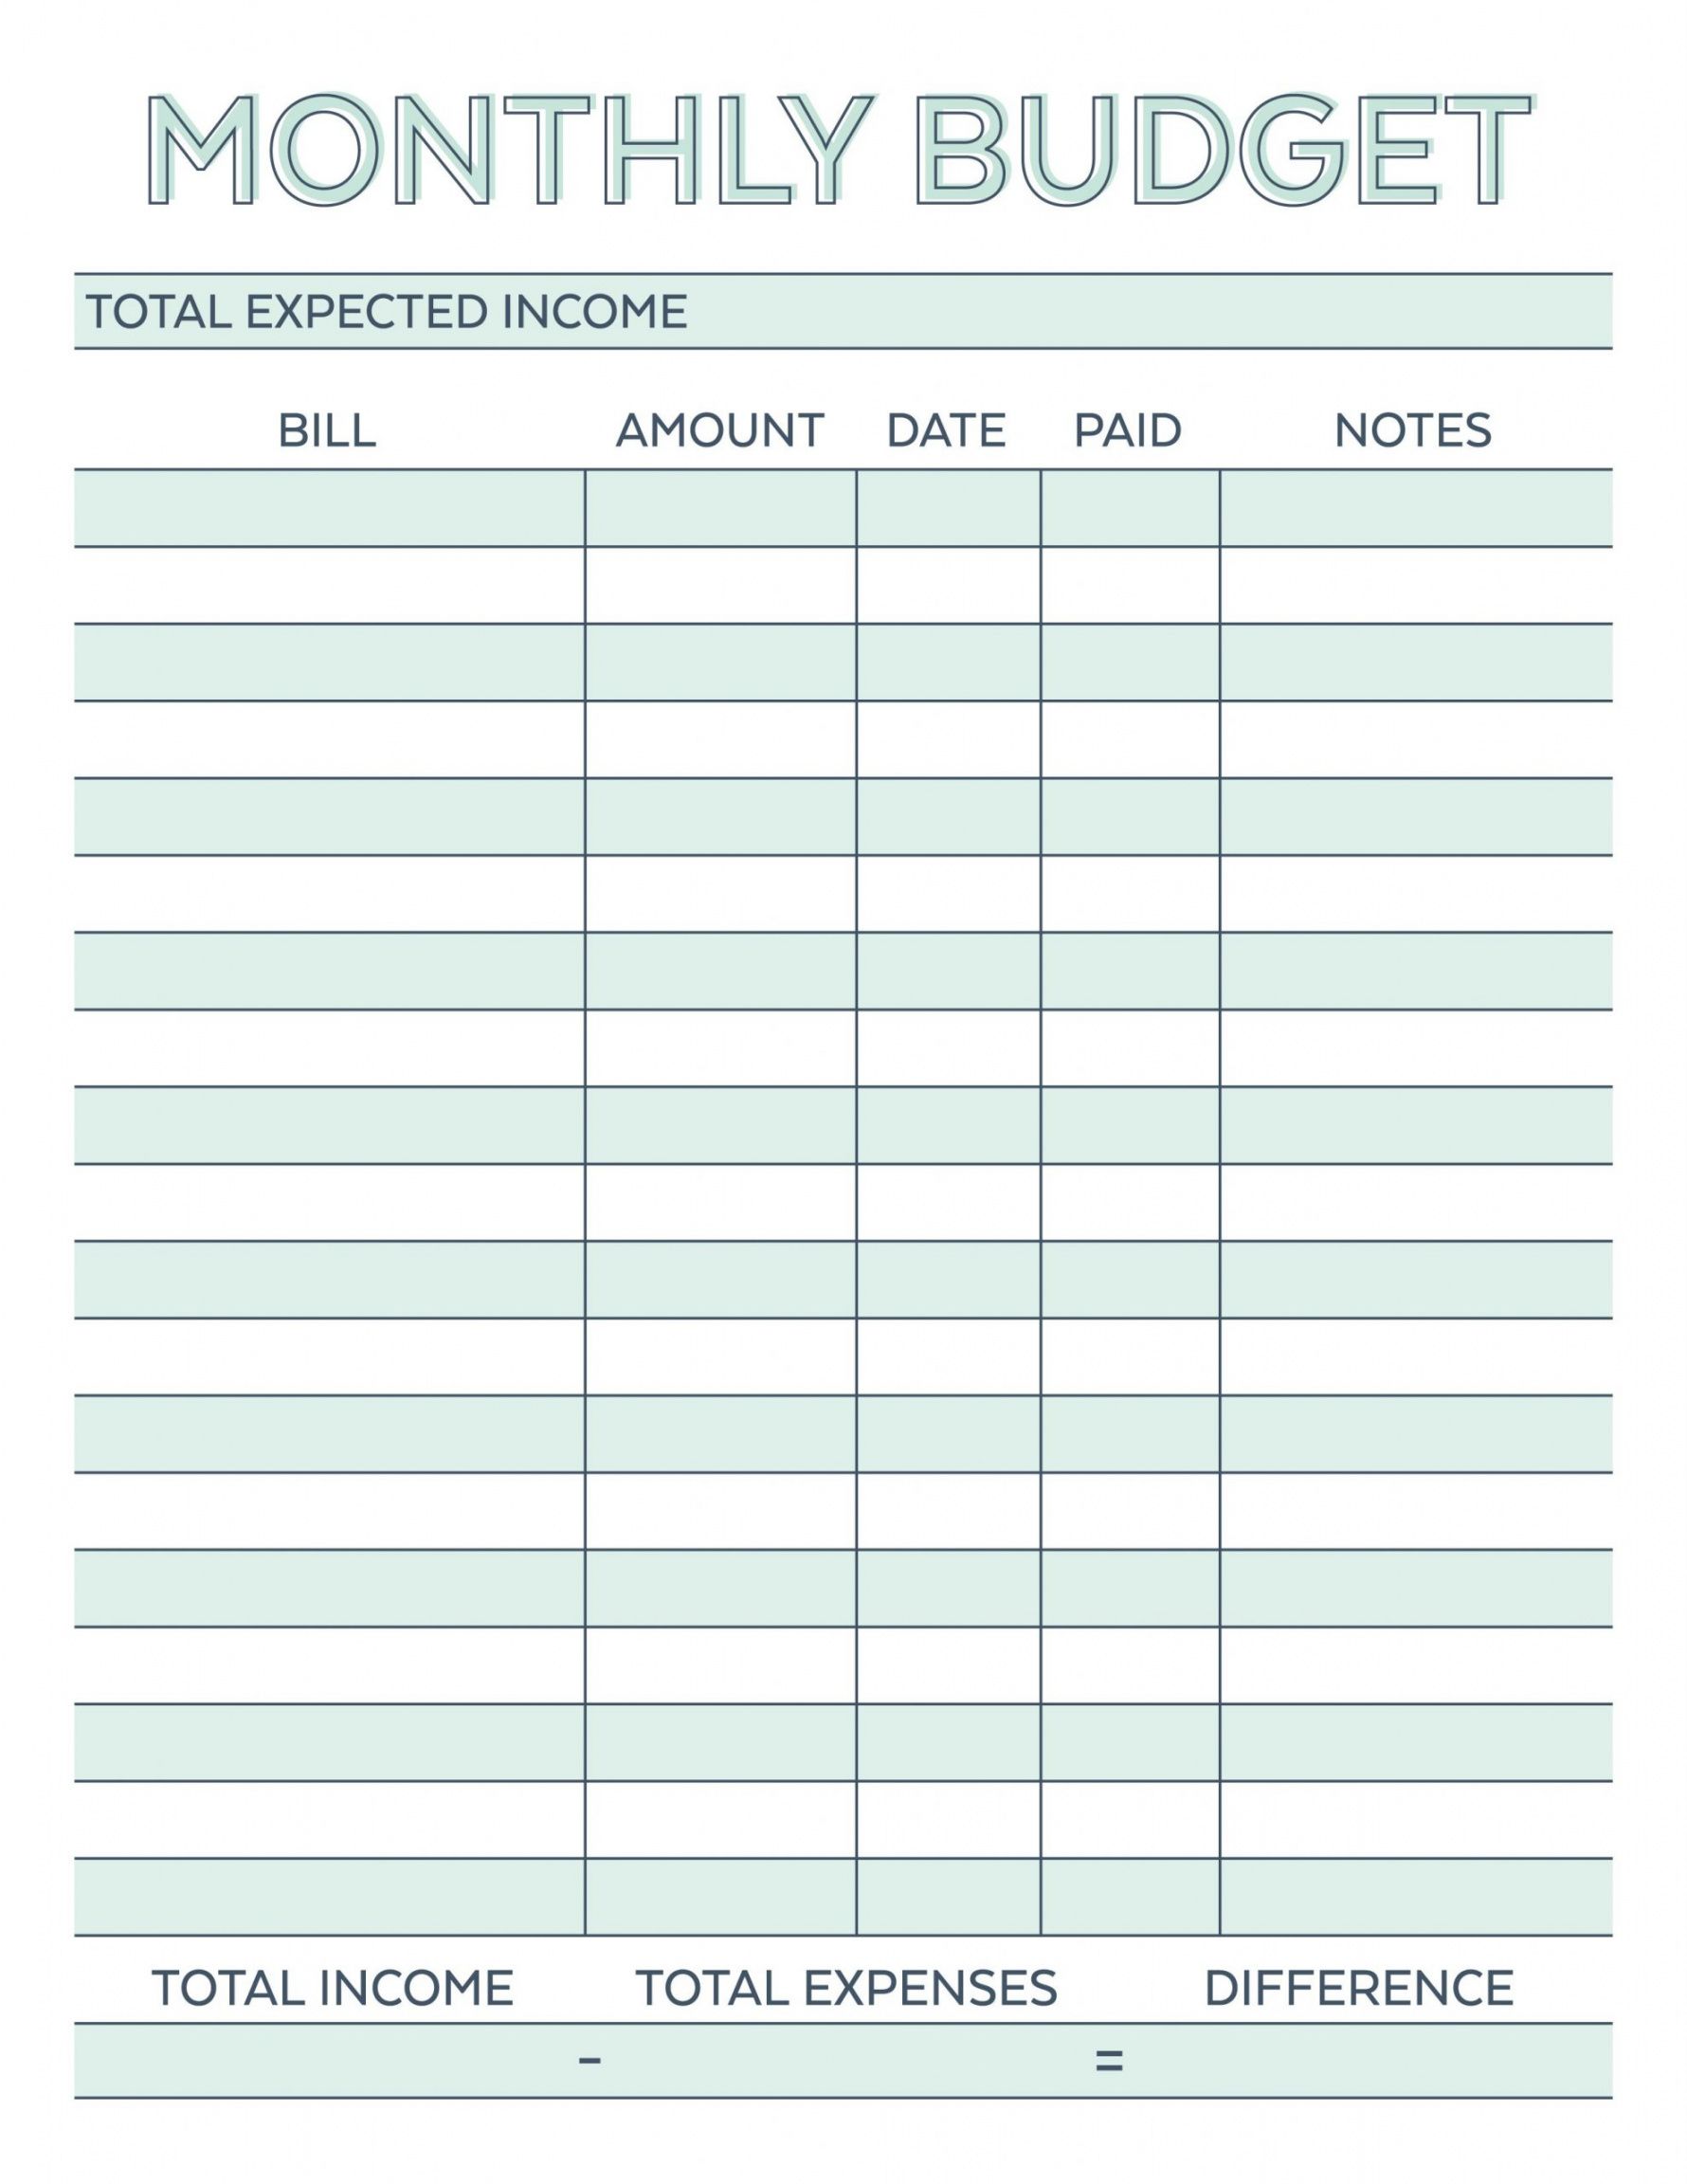 sample free personal monthly budget spreadsheet late example excel monthly spending budget template excel